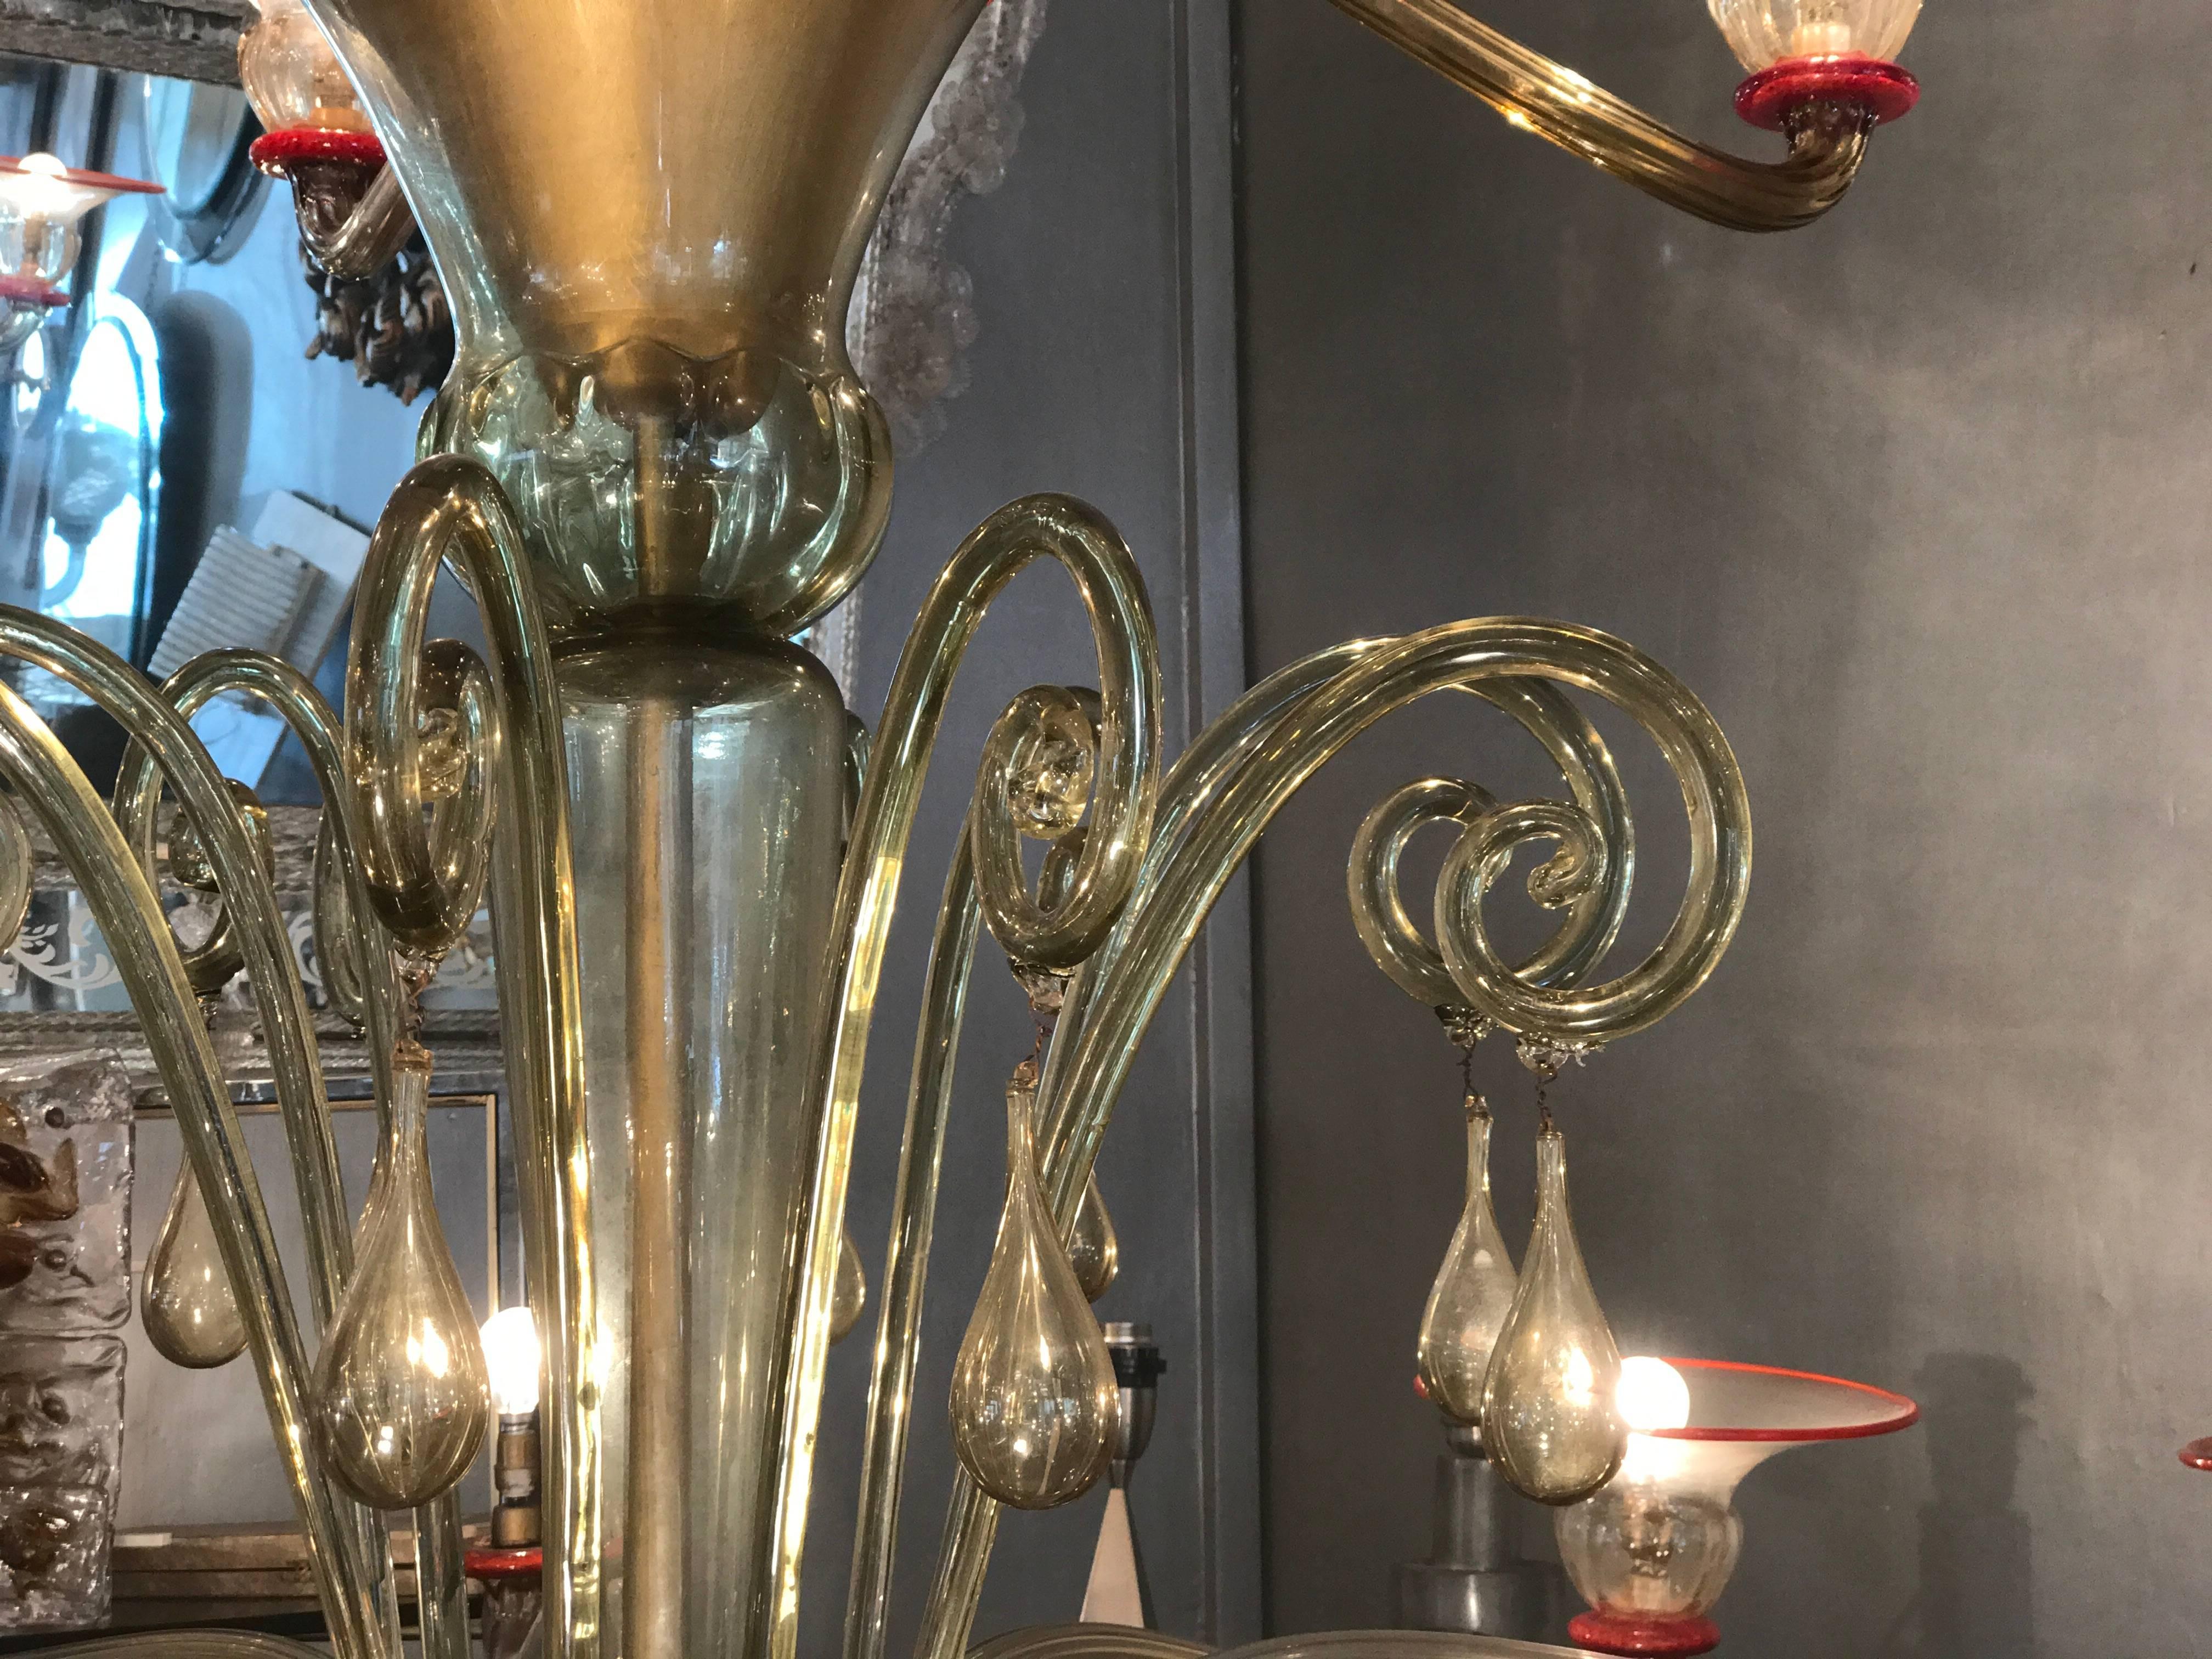 This outstanding amber and coral red handblown Murano glass chandelier on three levels with 18 arms, designed by Napoleone Martinuzzi.
Piece of great value and elegance.
All glass parts are in excellent original condition with no cracks or